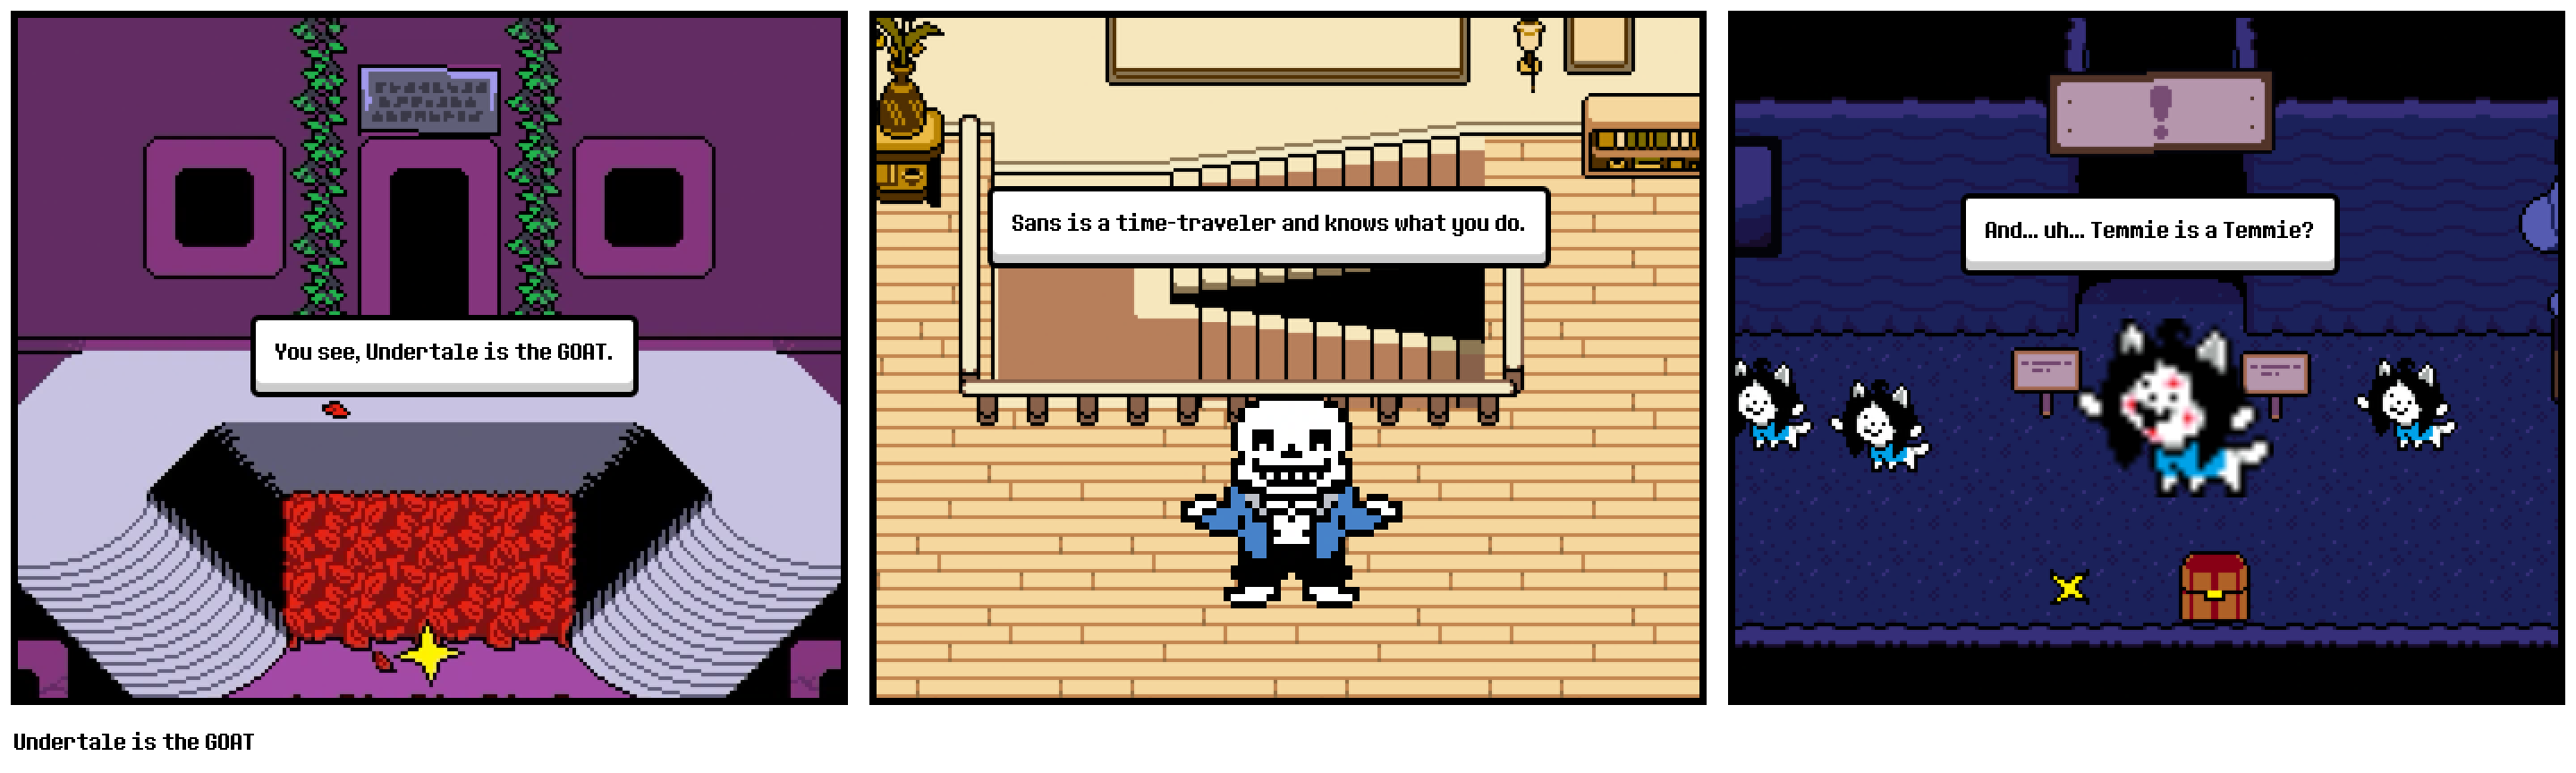 Undertale is the GOAT